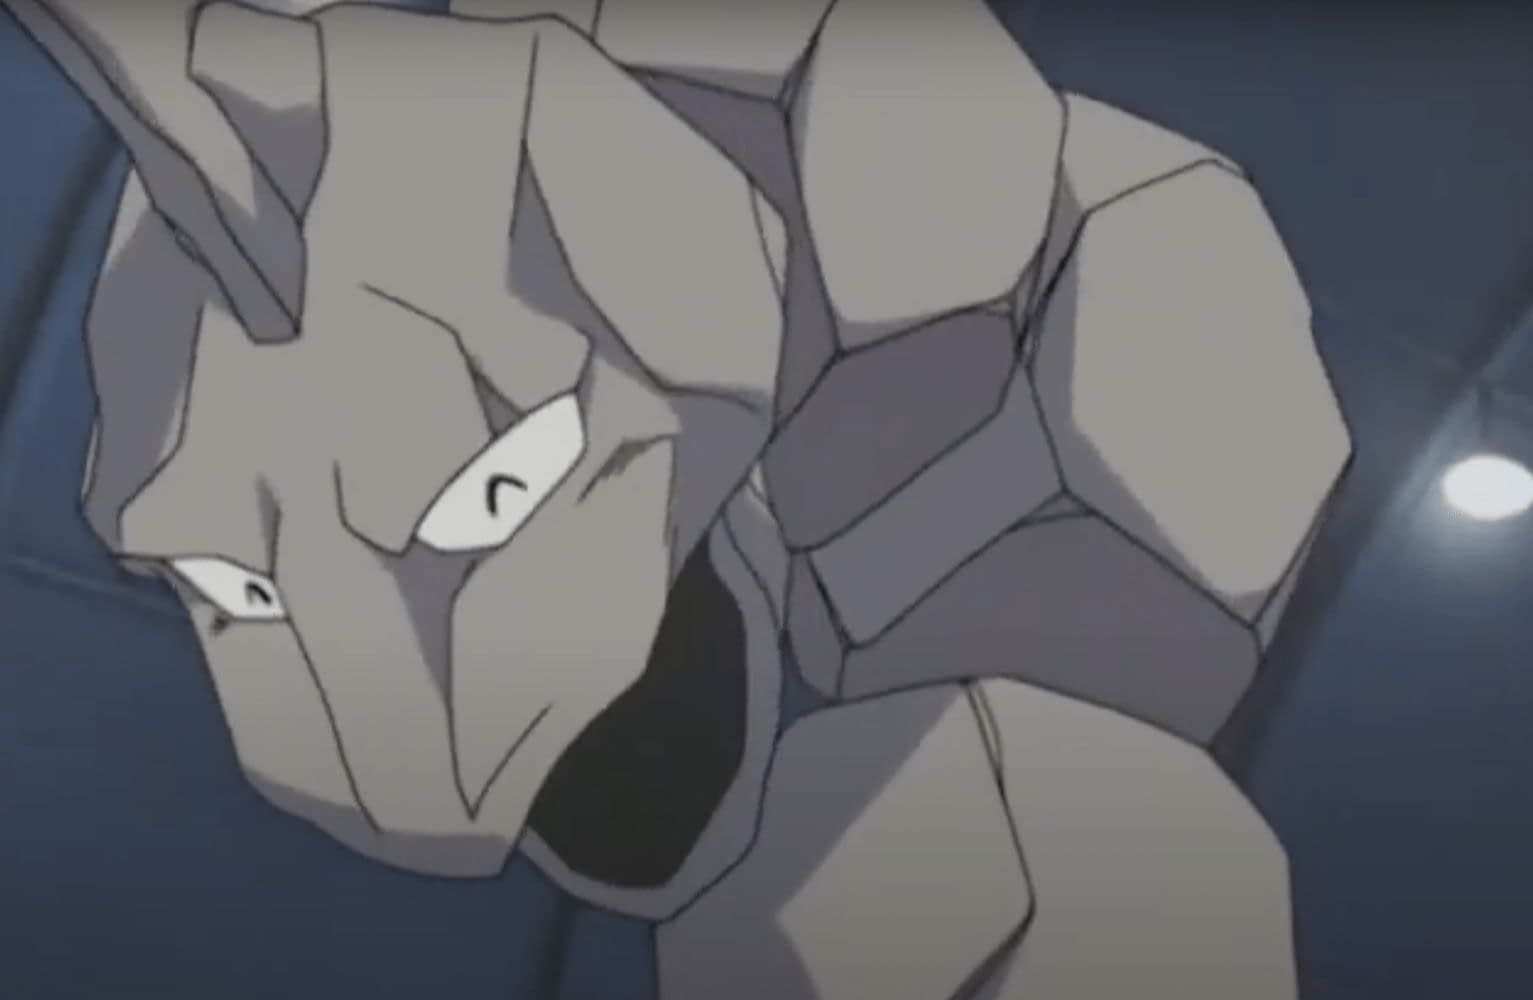 Rozoken on X: Clips weren't working on Twitch when I got this but here's  out shiny Onix from pokemon Quest if you missed it or wanted to see a shiny  in this